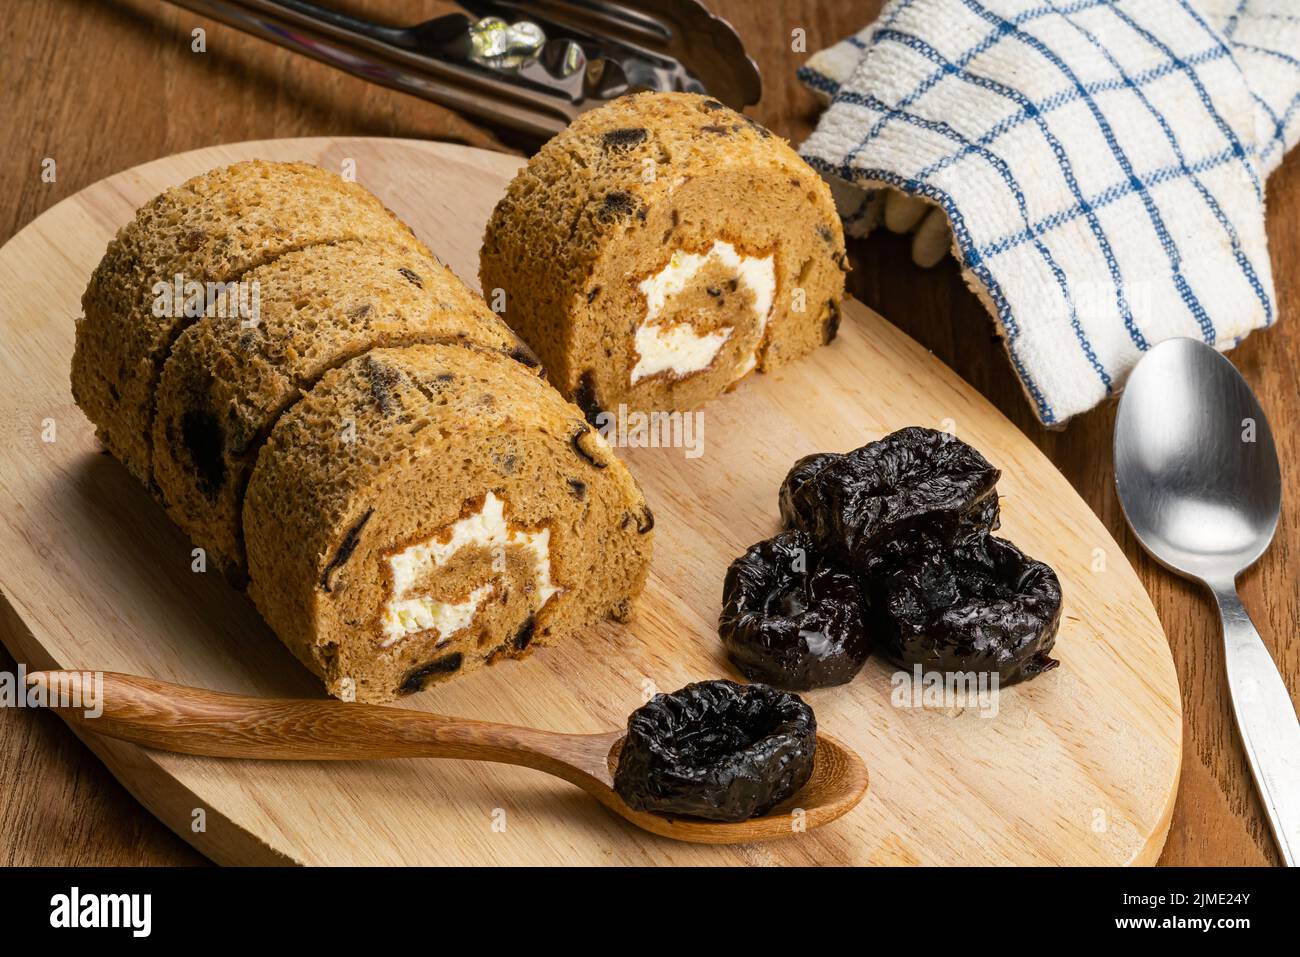 Hogh angle view of homemade sponge cake roll and dried pitted prune fruit on wooden board. Stock Photo